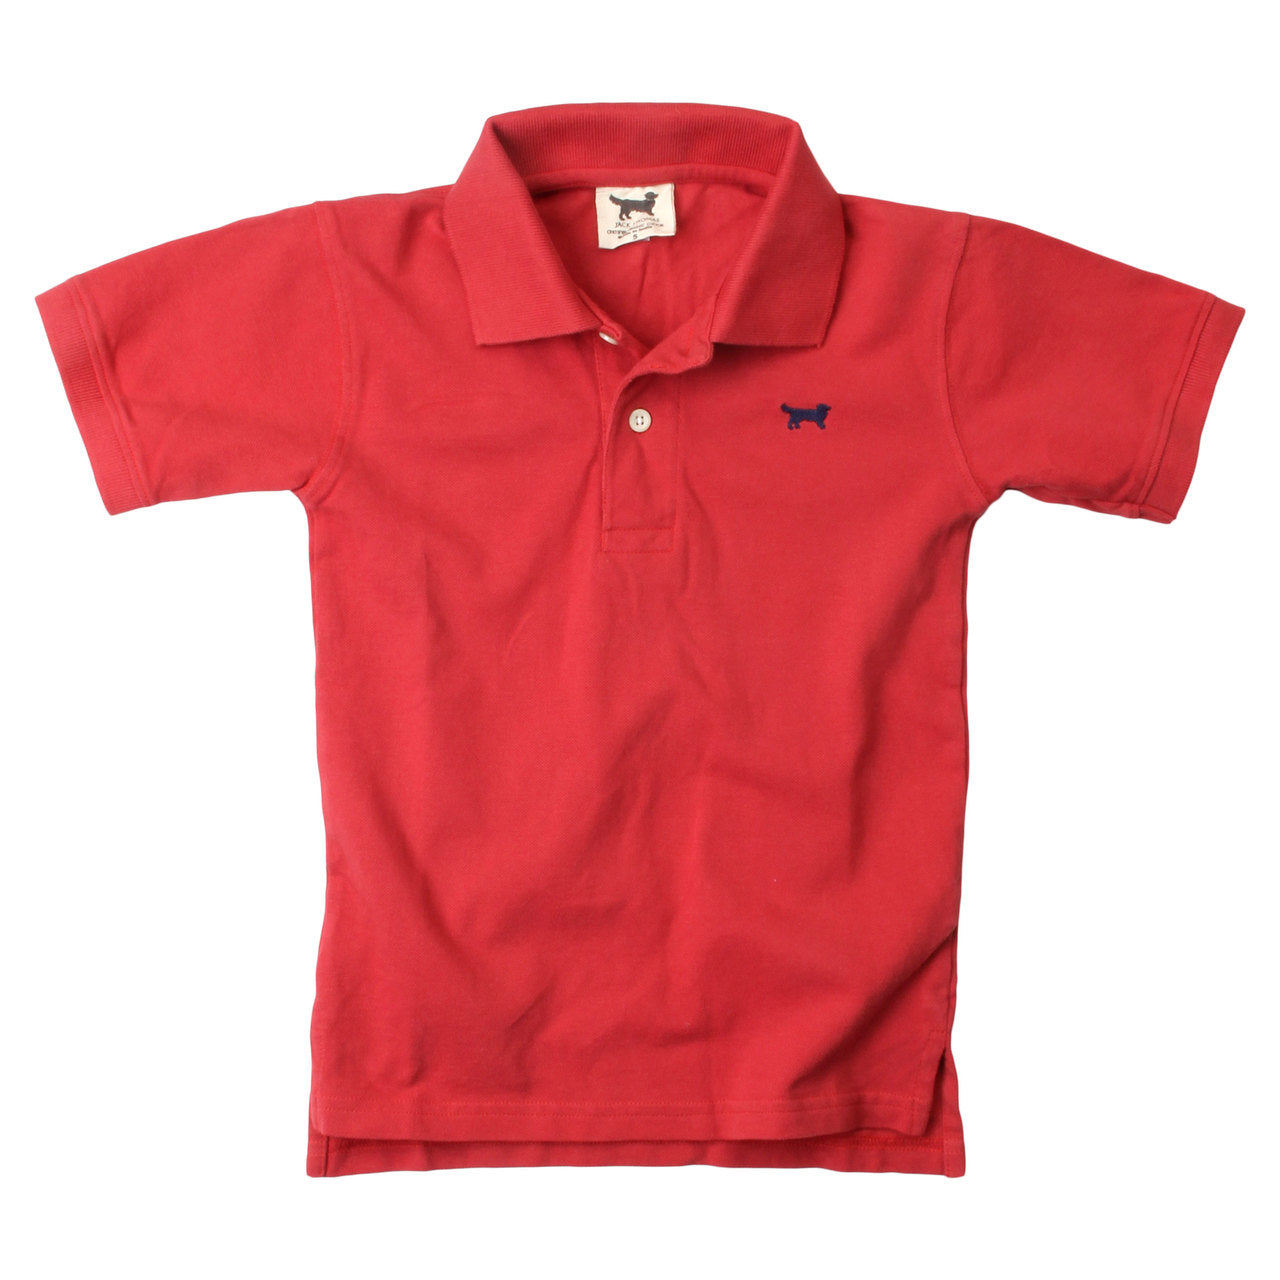 Wes & Willy Classic Short Sleeve Pique Polo/Red